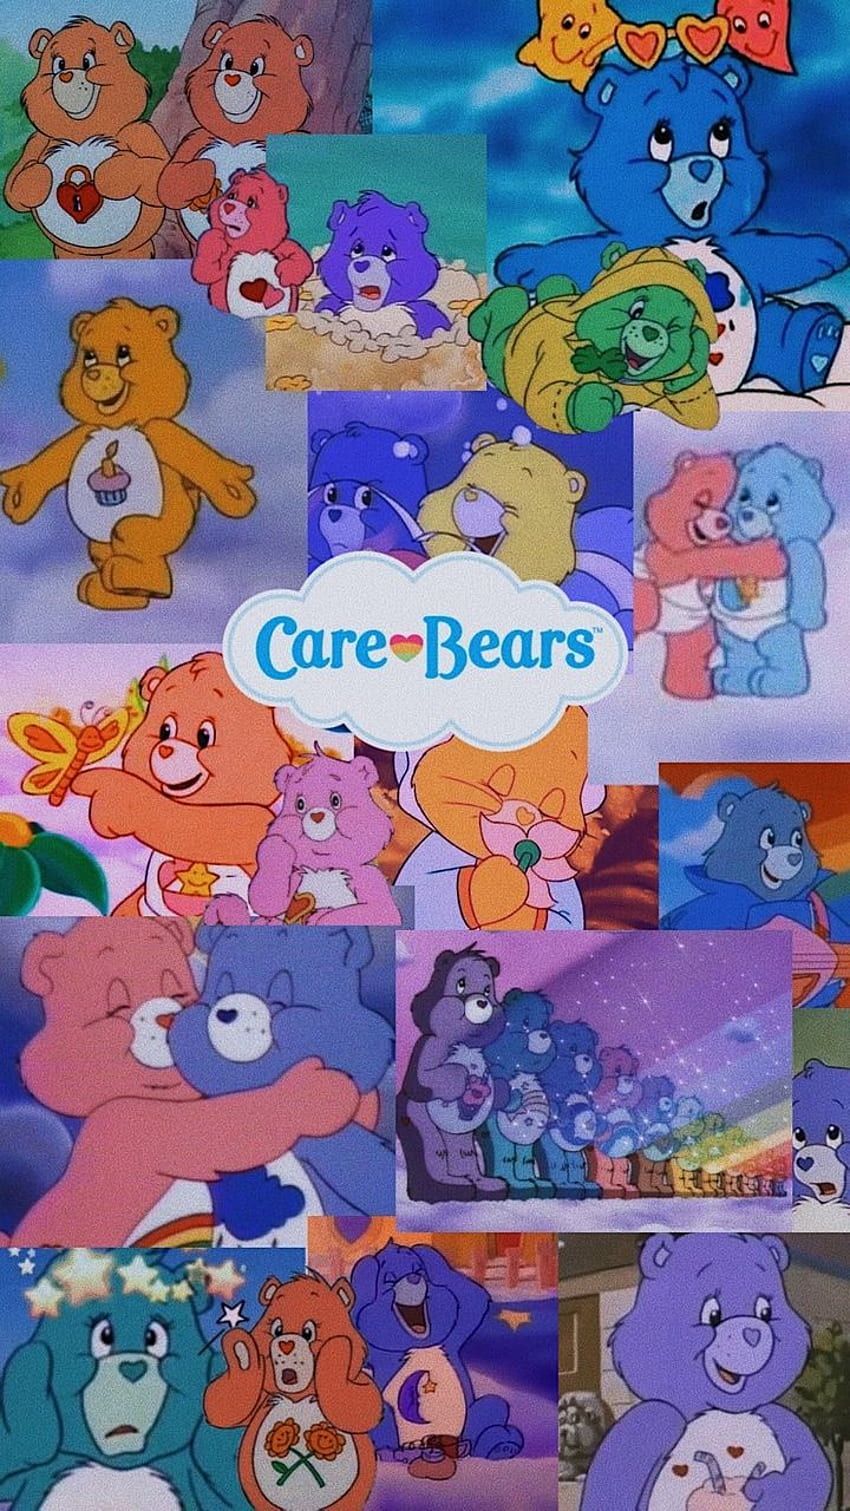 A collection of care bears images is displayed in a collage format, featuring a large group of care bears in various poses and sizes - Care Bears